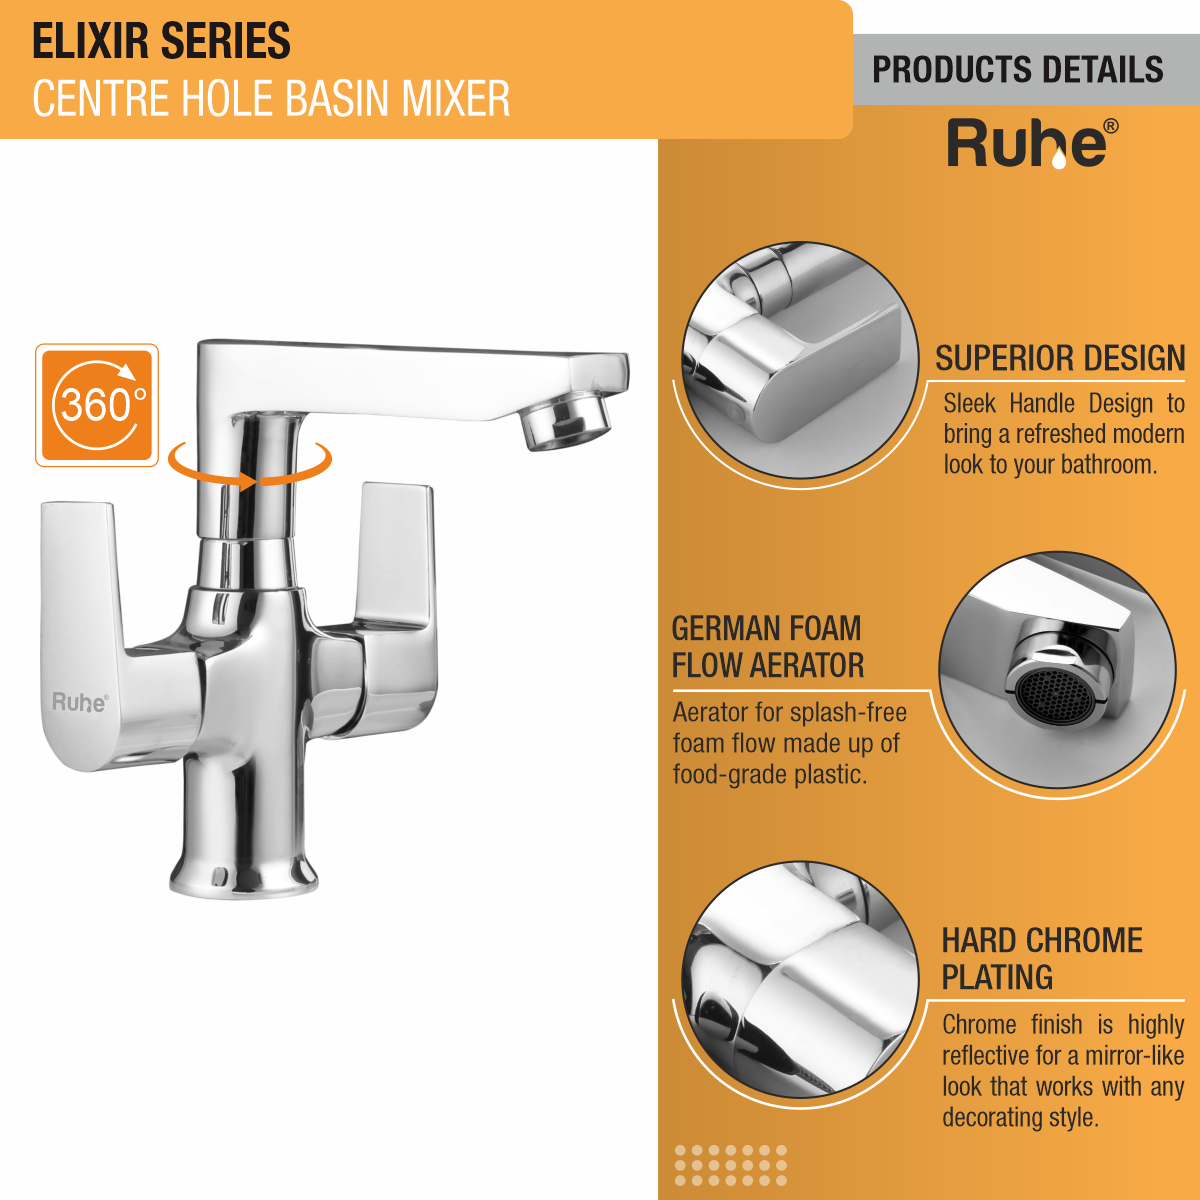 Elixir Centre Hole Basin Mixer with Small (7 inches) Swivel Spout Faucet product details